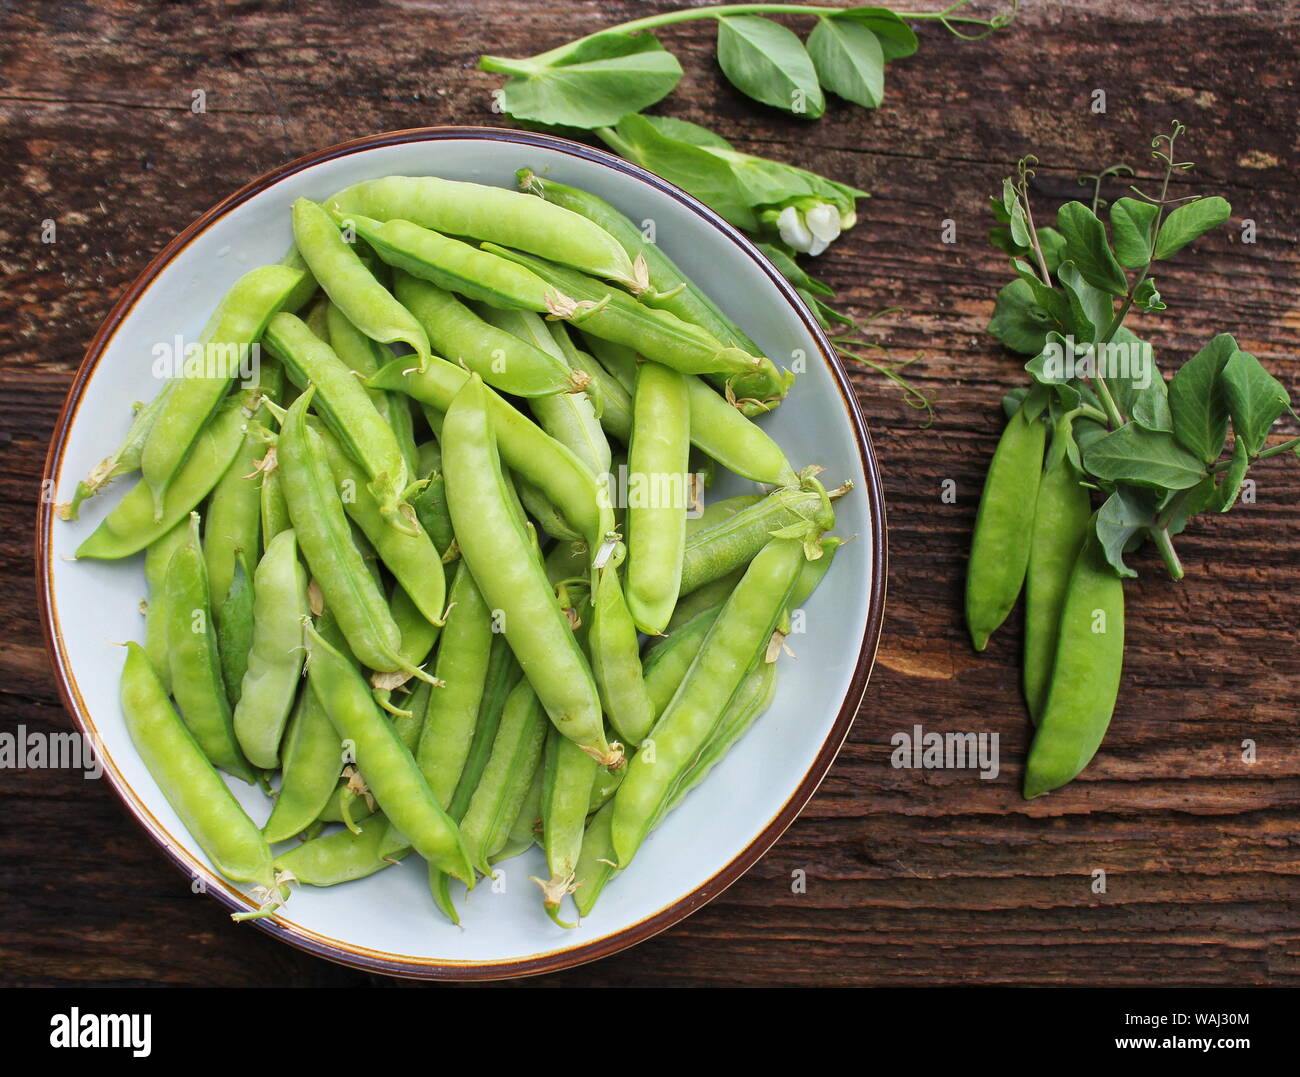 Green peas in bowl on wooden table background. Top view Stock Photo